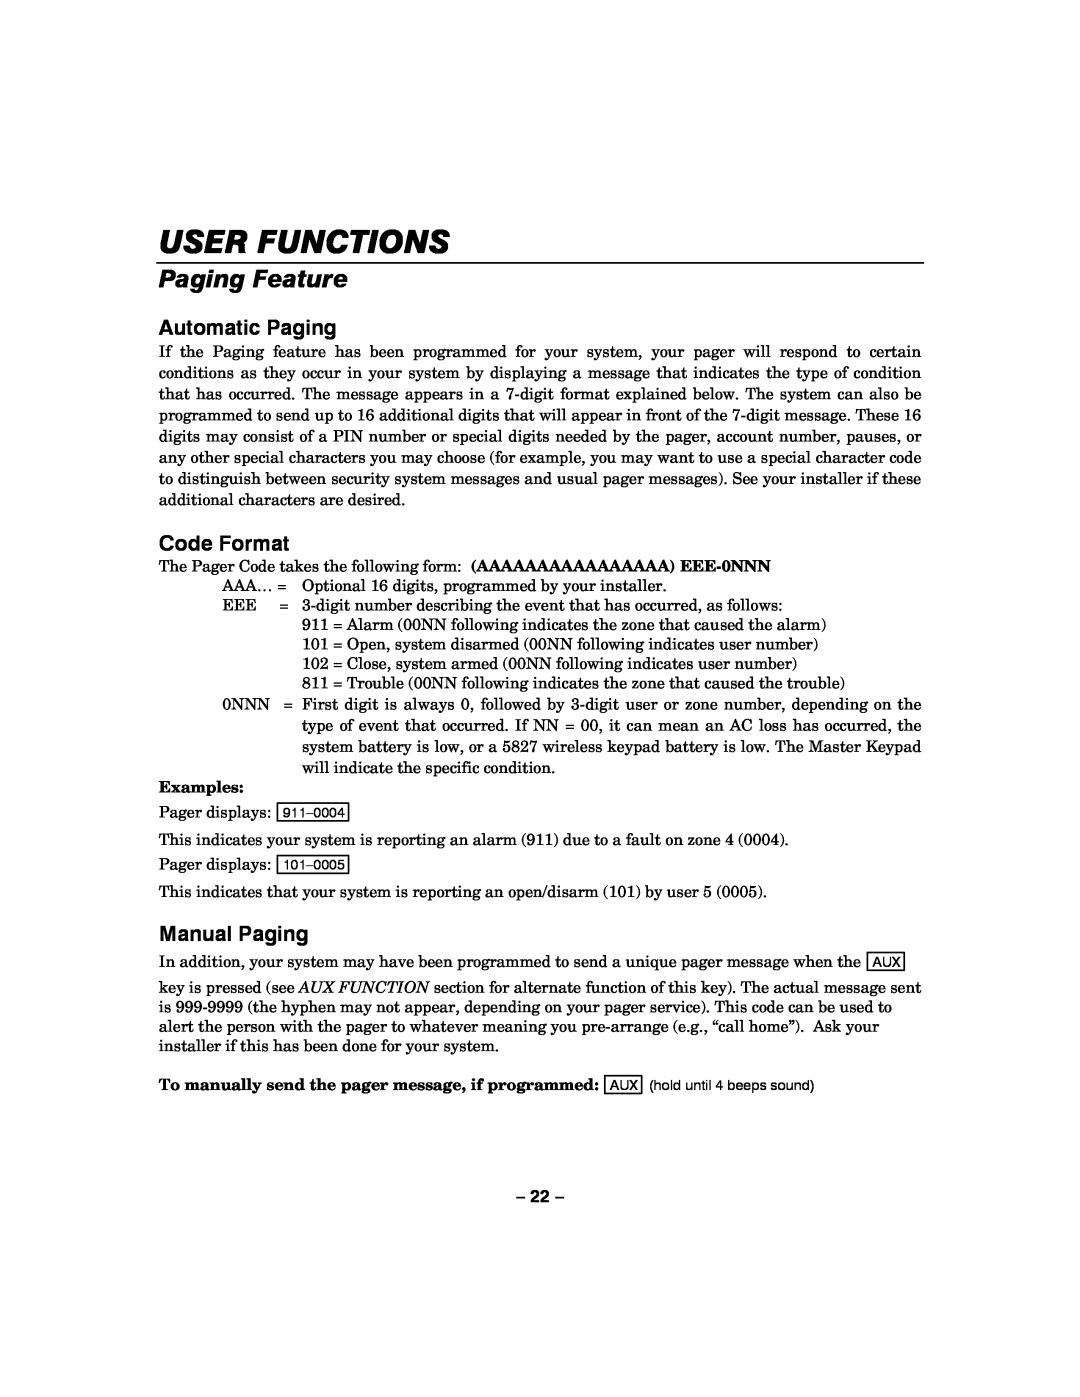 Honeywell LYNXR-2 manual User Functions, Paging Feature, Automatic Paging, Code Format, Manual Paging, Examples 